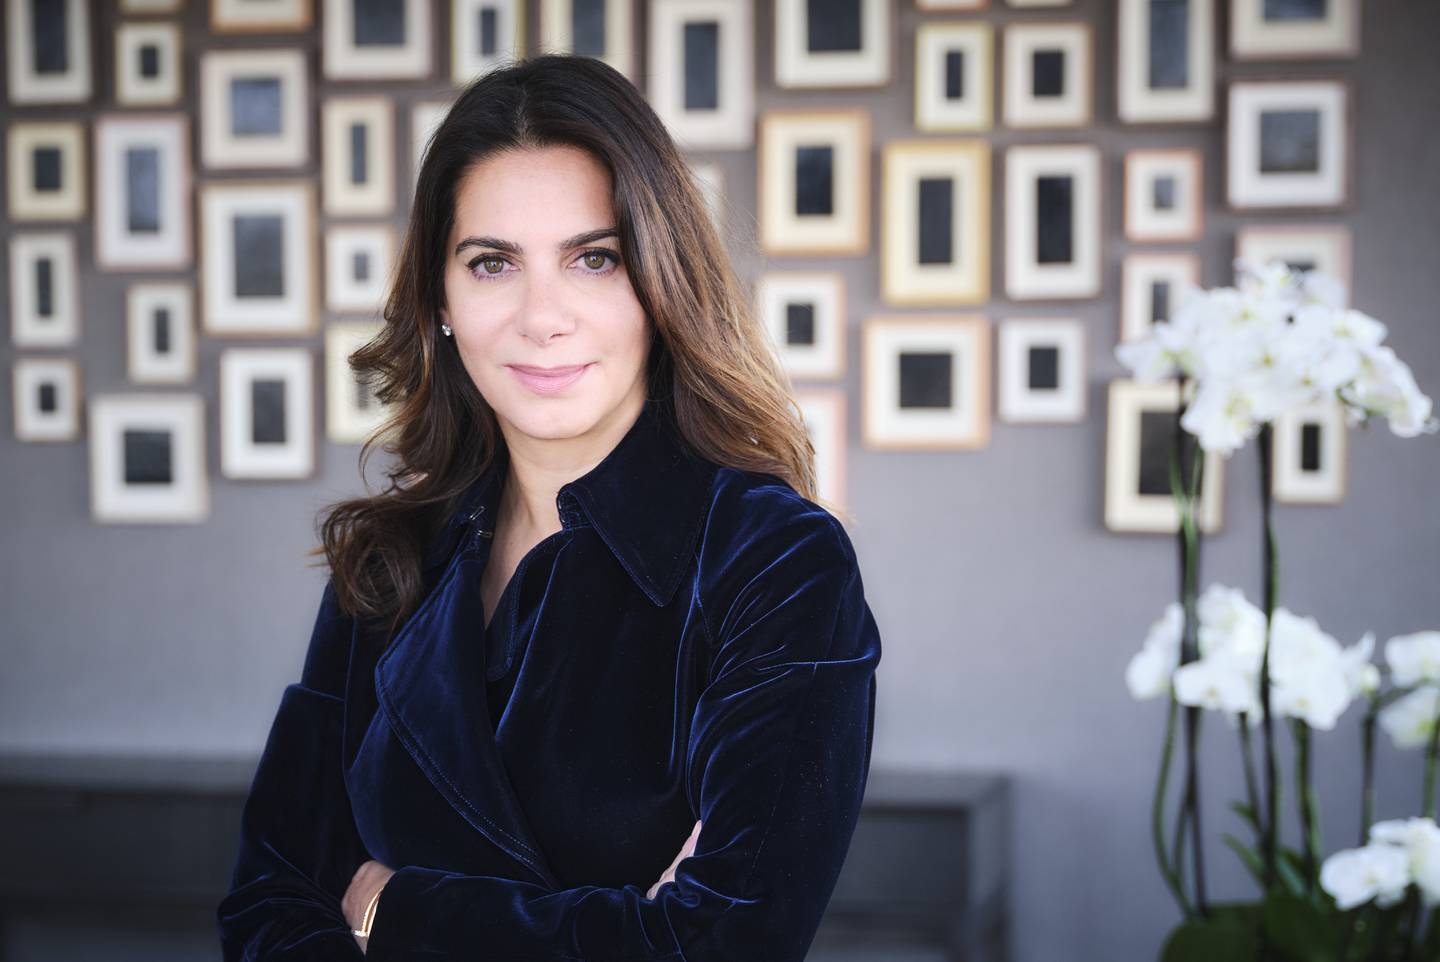 Chabi Nouri, the former Piaget CEO, is joining a private equity vehicle focused on disruptive companies in the luxury and consumer industries.